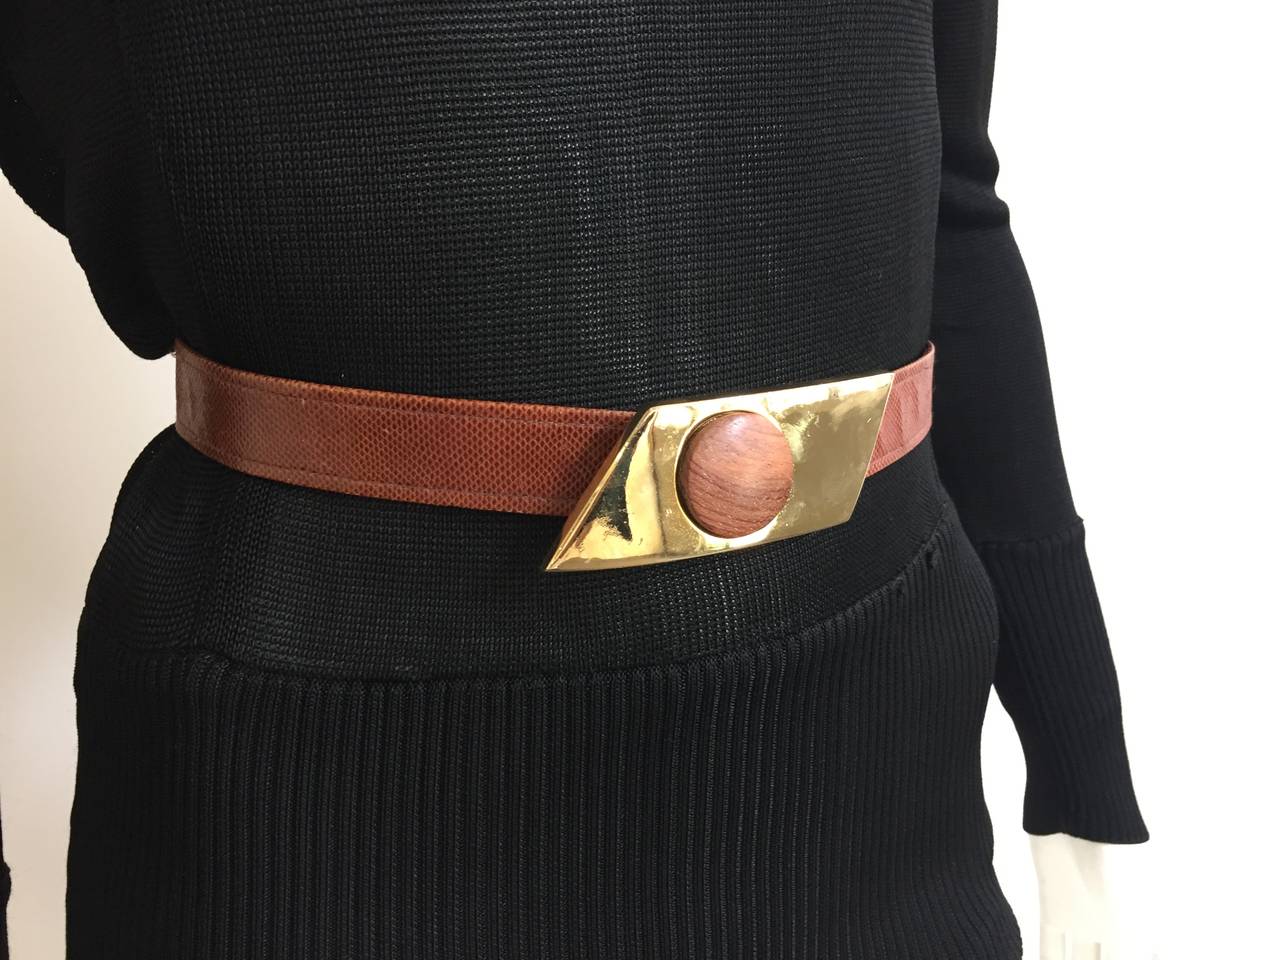 Alexis Kirk 1980s 'Wood Collection' abstract brass buckle with lizard skin belt strap. This Alexis Kirk 'Wood Collection' design belt was given to my client from Ed Riley who worked for Alexis Kirk. Ed Riley left Alexis Kirk and went to work for